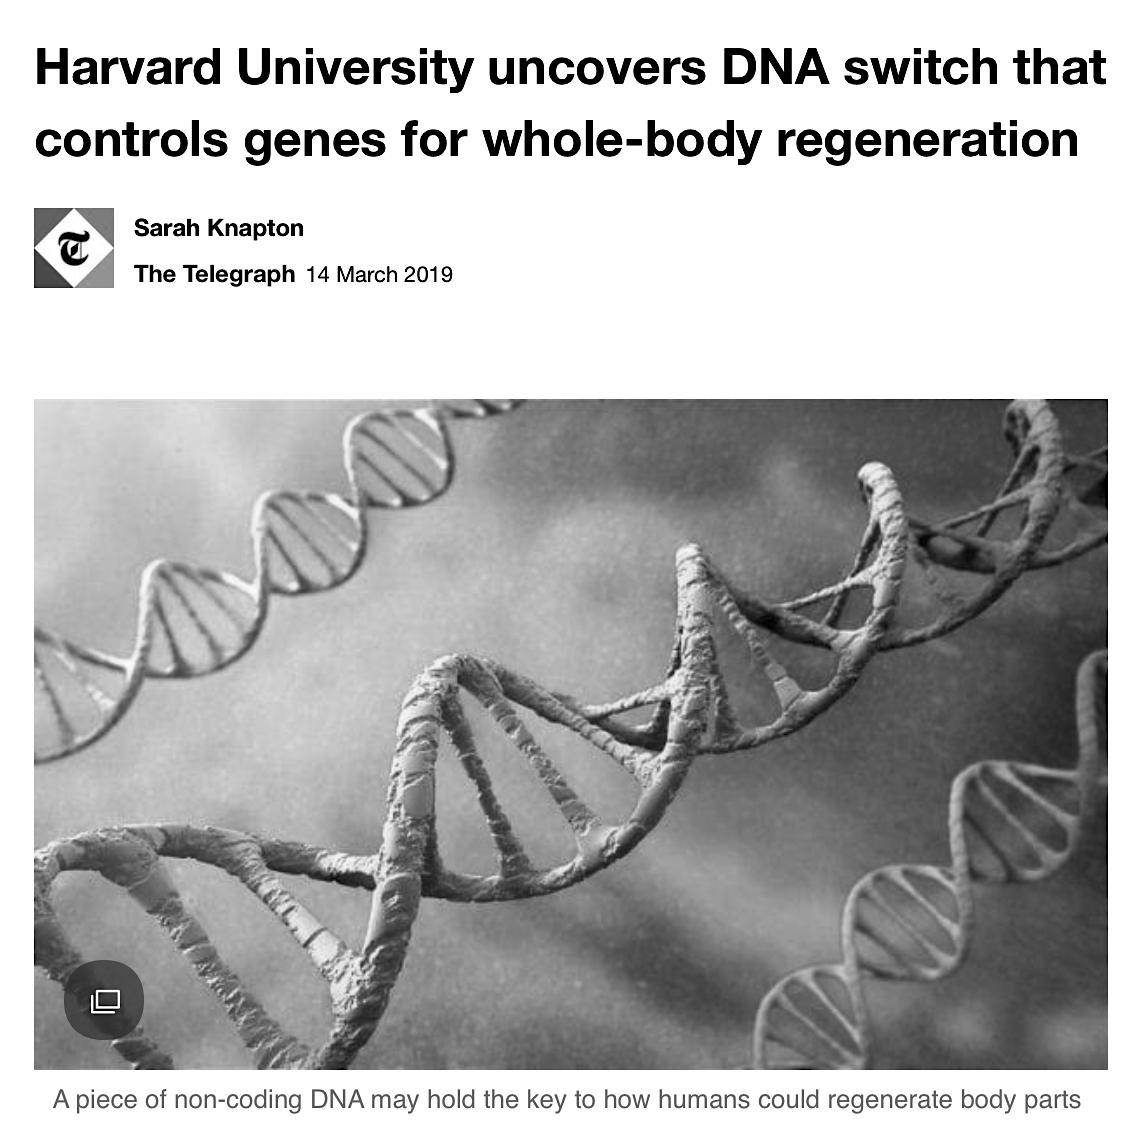 Scientists Discover That In Worms, A Section Of Non-Coding Or ‘Junk’ DNA Controls The Activation Of A ‘Master Control Gene’ Called Early Growth Response (EGR) Which Acts Like A Power Switch, Turning Regeneration On Or Off.March 14, 2019 https://sg.news.yahoo.com/harvard-university-uncovers-dna-switch-180000109.html